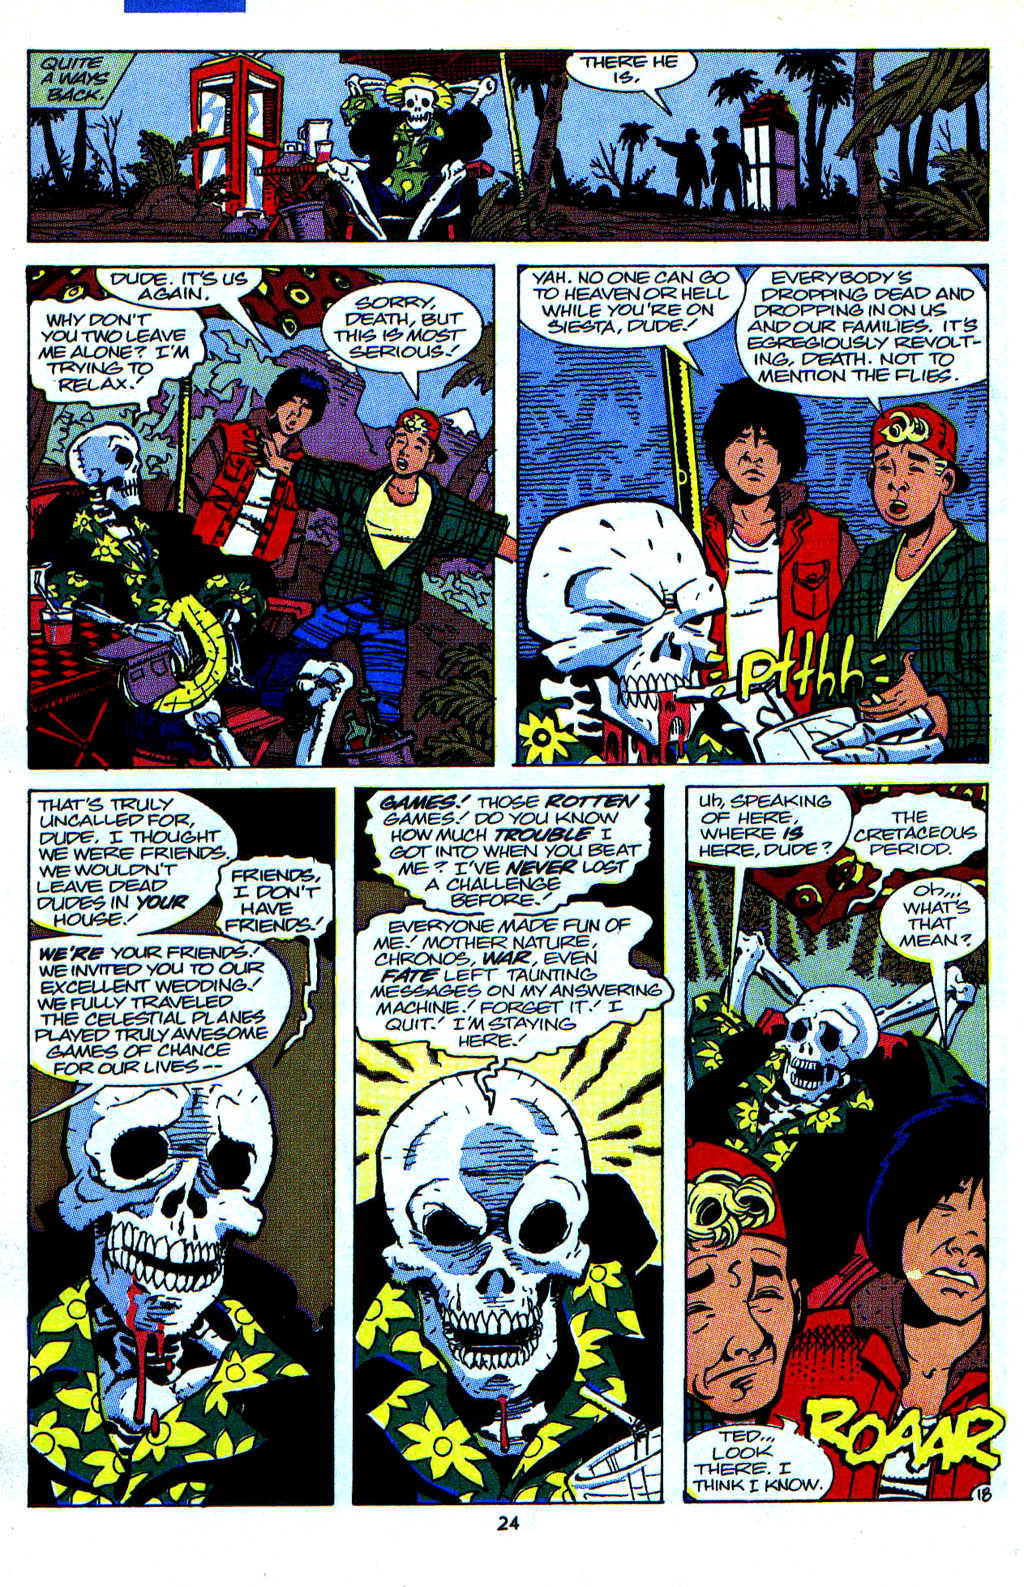 Read online Bill & Ted's Excellent Comic Book comic -  Issue #2 - 19